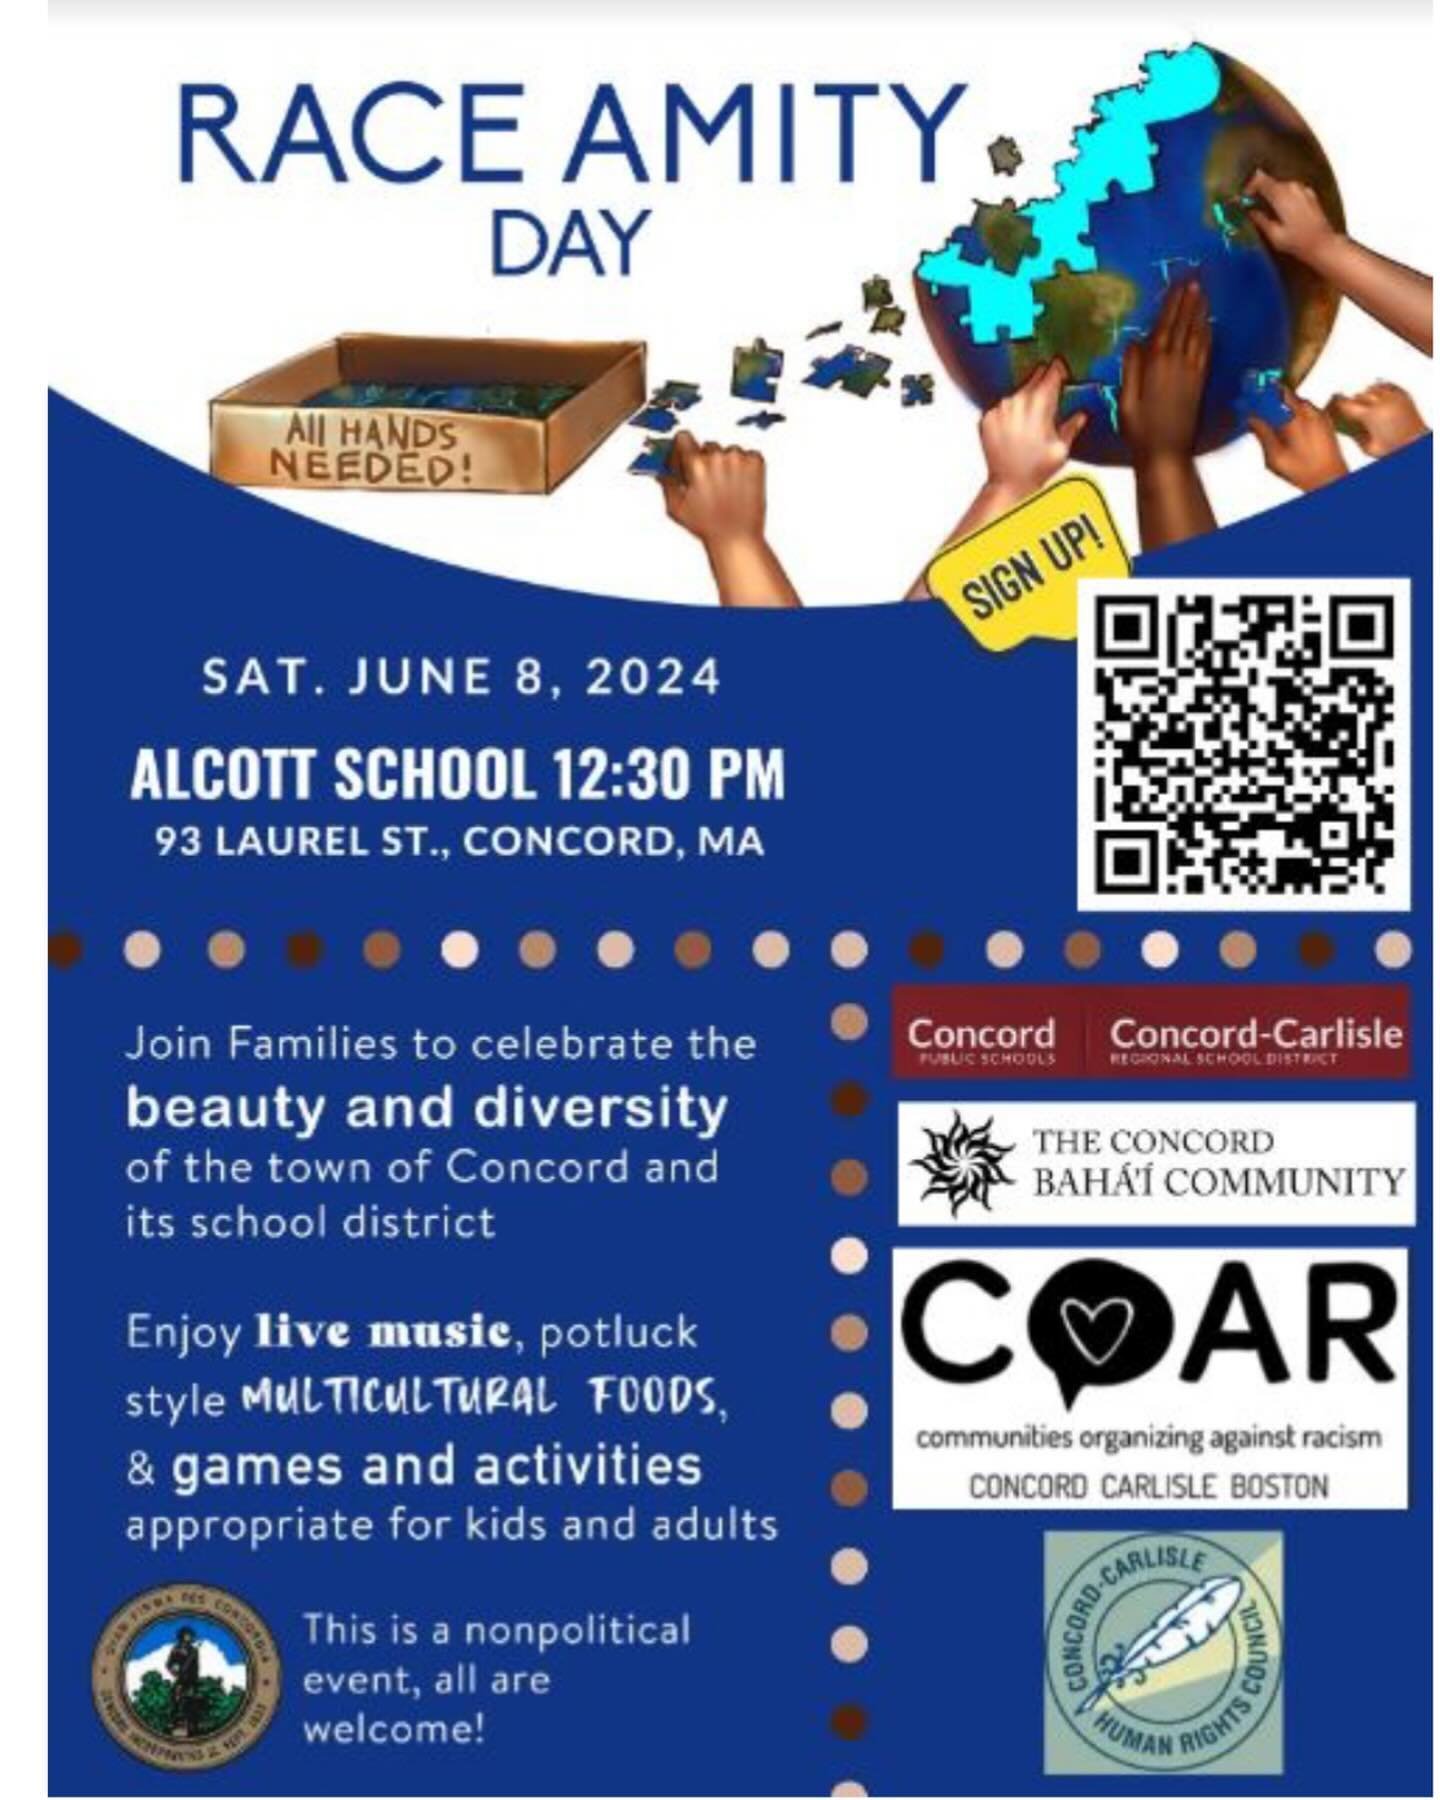 The Race Amity Planning Committee is thrilled to announce the 3rd Annual Race Amity Day Community Celebration at Alcott Elementary School on Saturday, June 8, 2024, from 12:30 pm to 3:00 pm. 

They warmly invite all faculty, staff, students, families